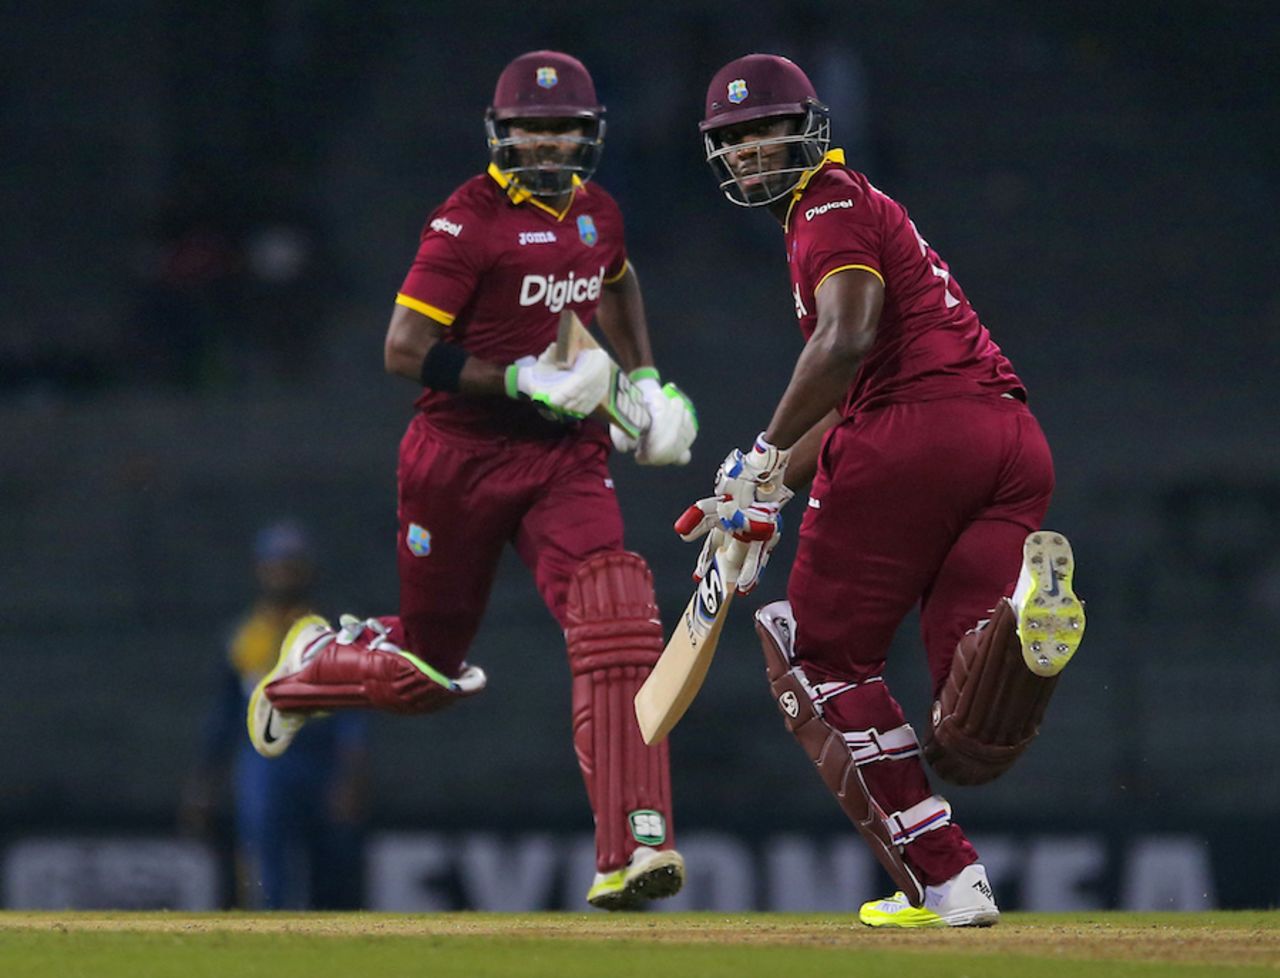 Andre Russell and Darren Bravo shared a 58-run partnership for the fifth wicket, Sri Lanka v West Indies, 1st ODI, Colombo, November 1, 2015